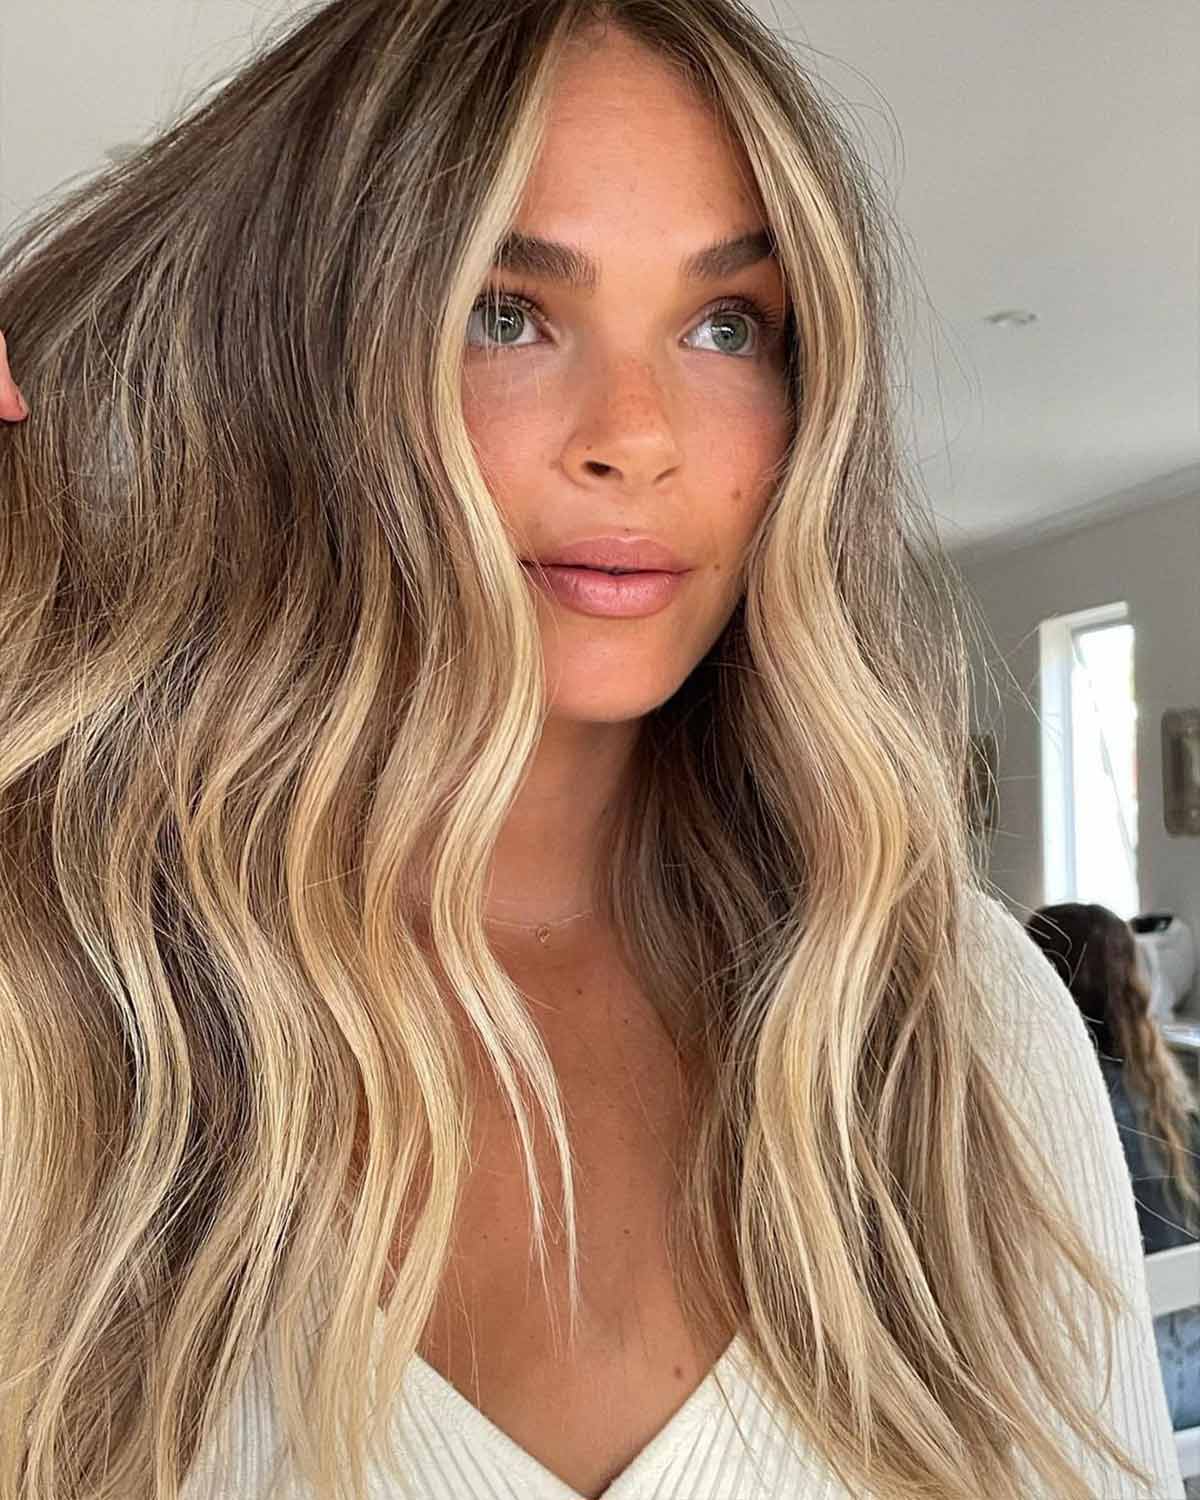 10 Blonde Hair Colors With Highlights That Look Stunning